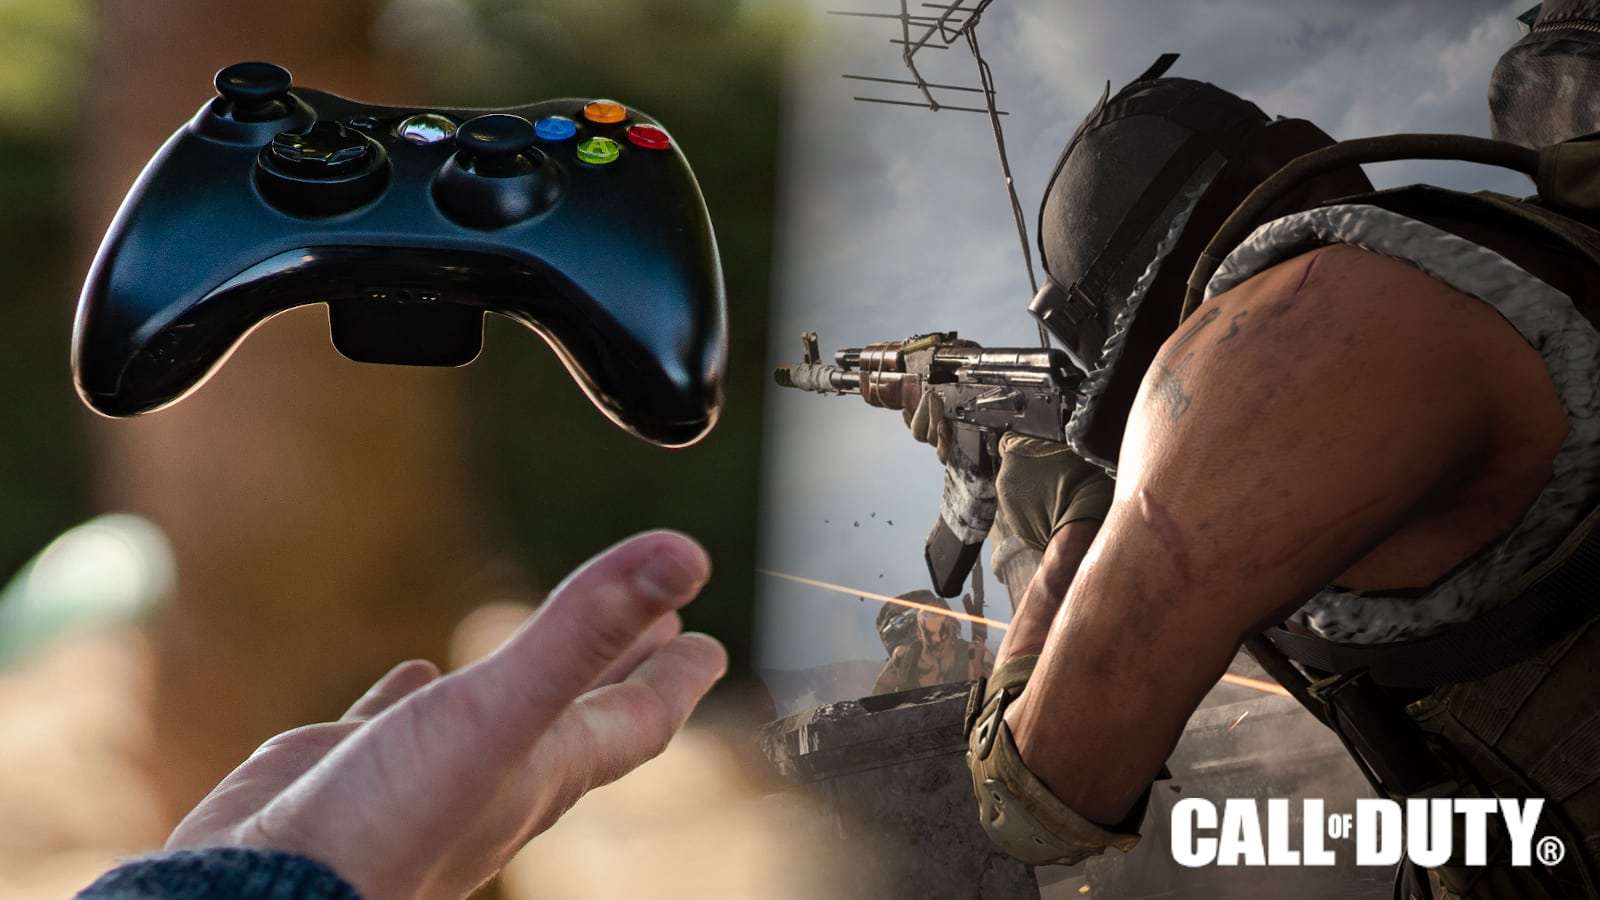 call of duty player controller grip claw menace to society